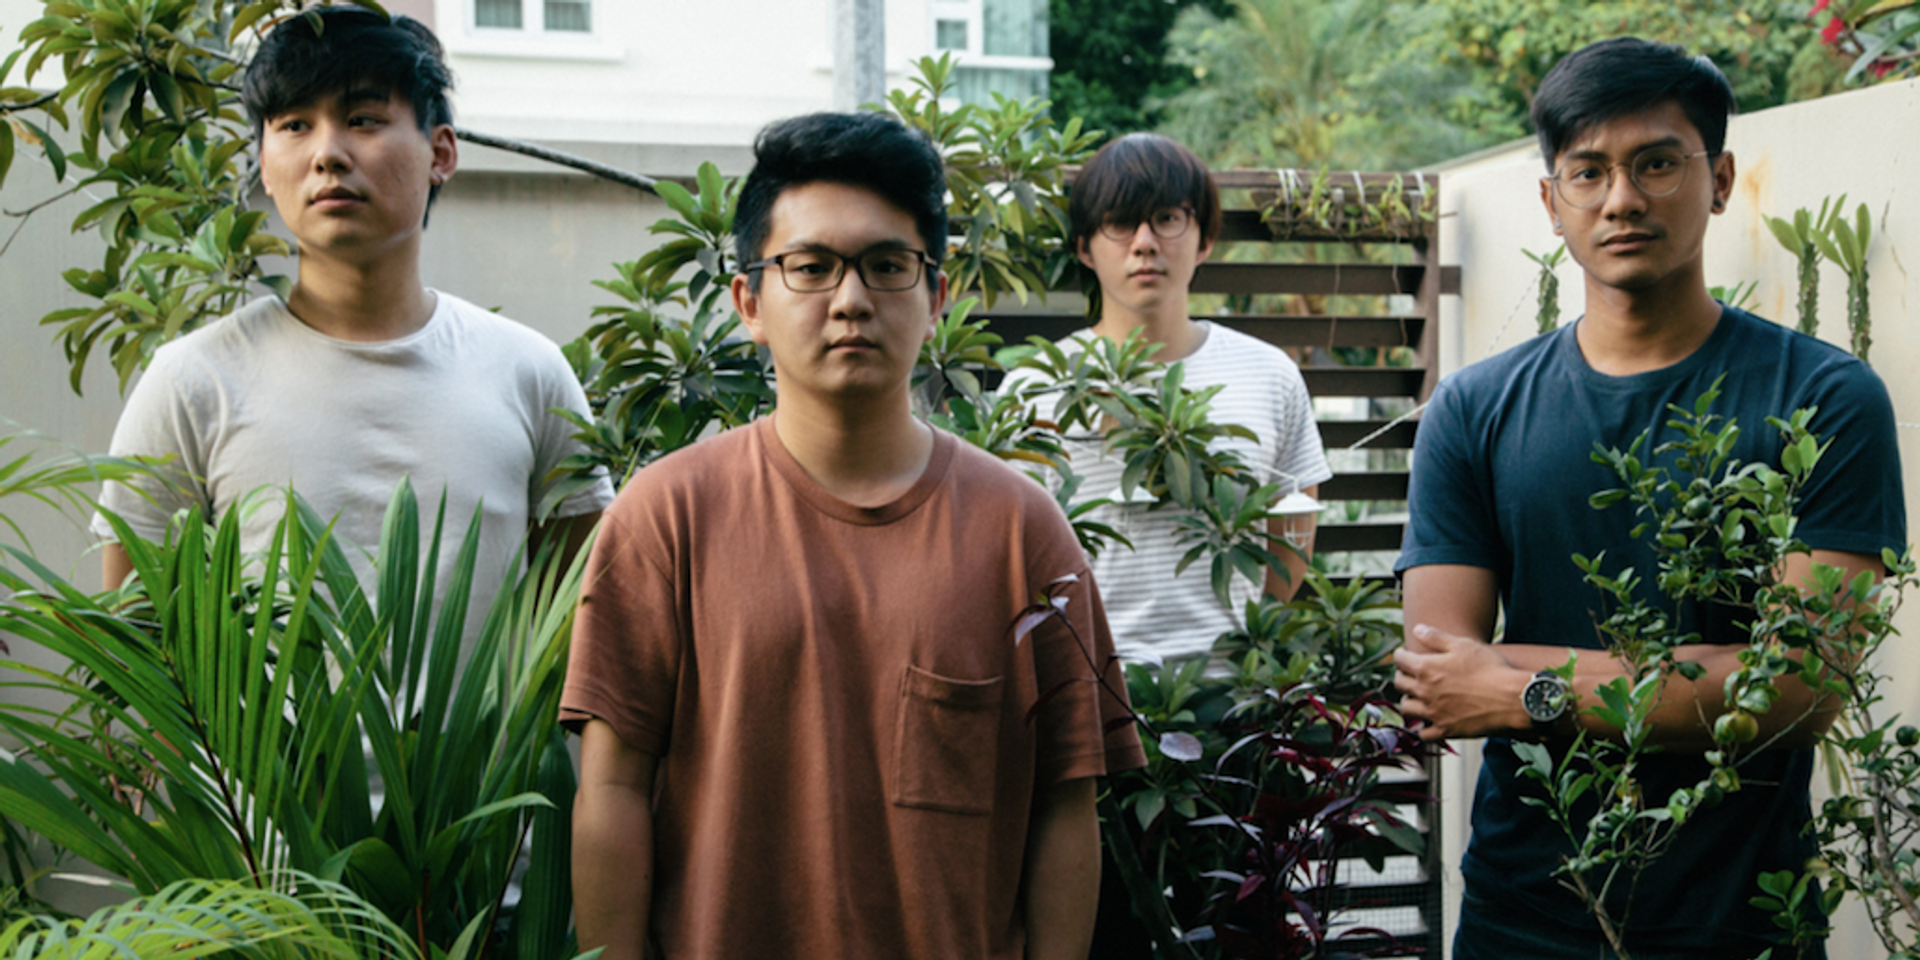 hauste announce album launch show with Forests, Subsonic Eye and The Nebula